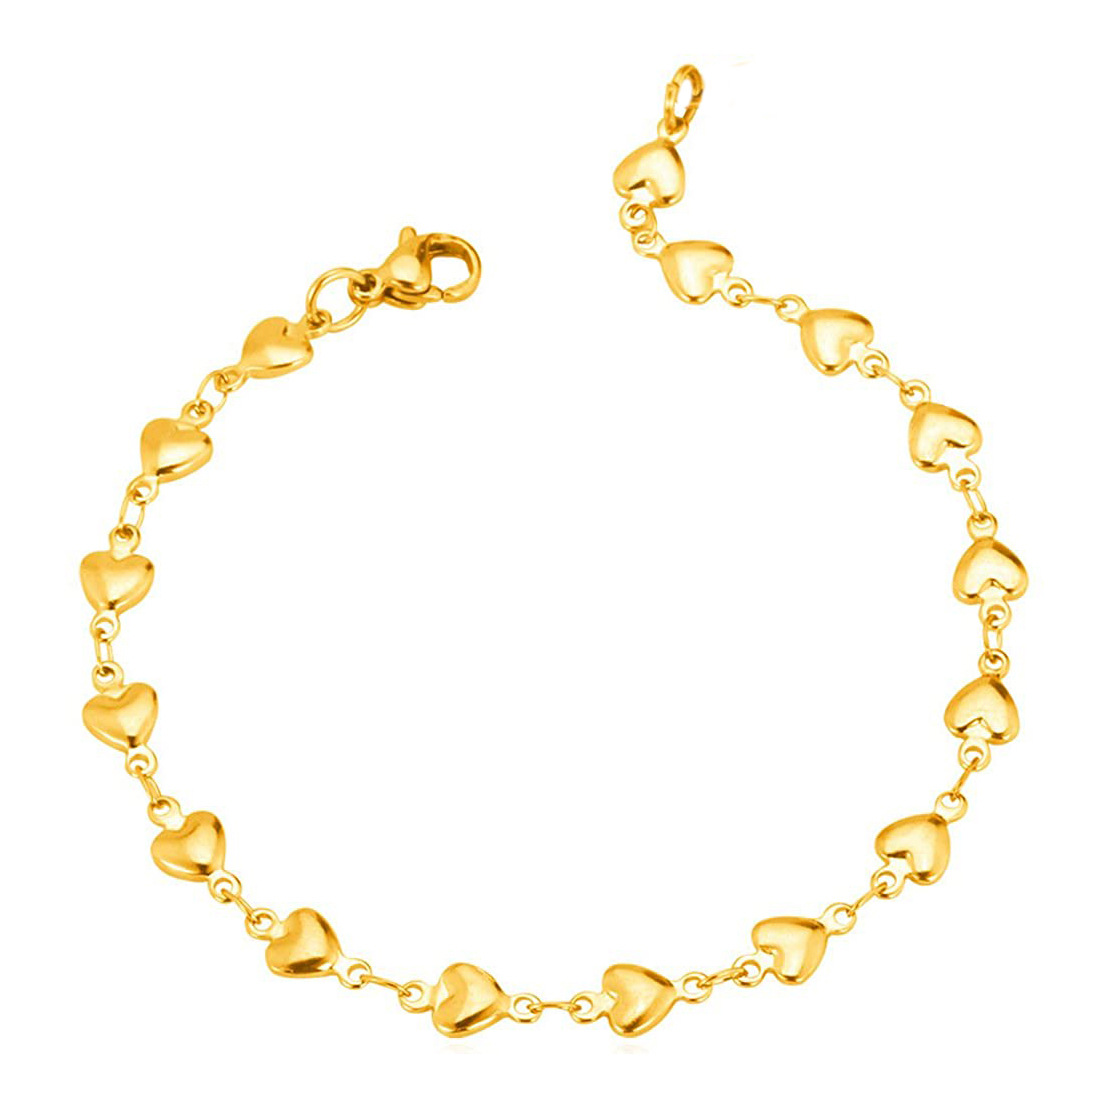 2:Lobster clasp gold